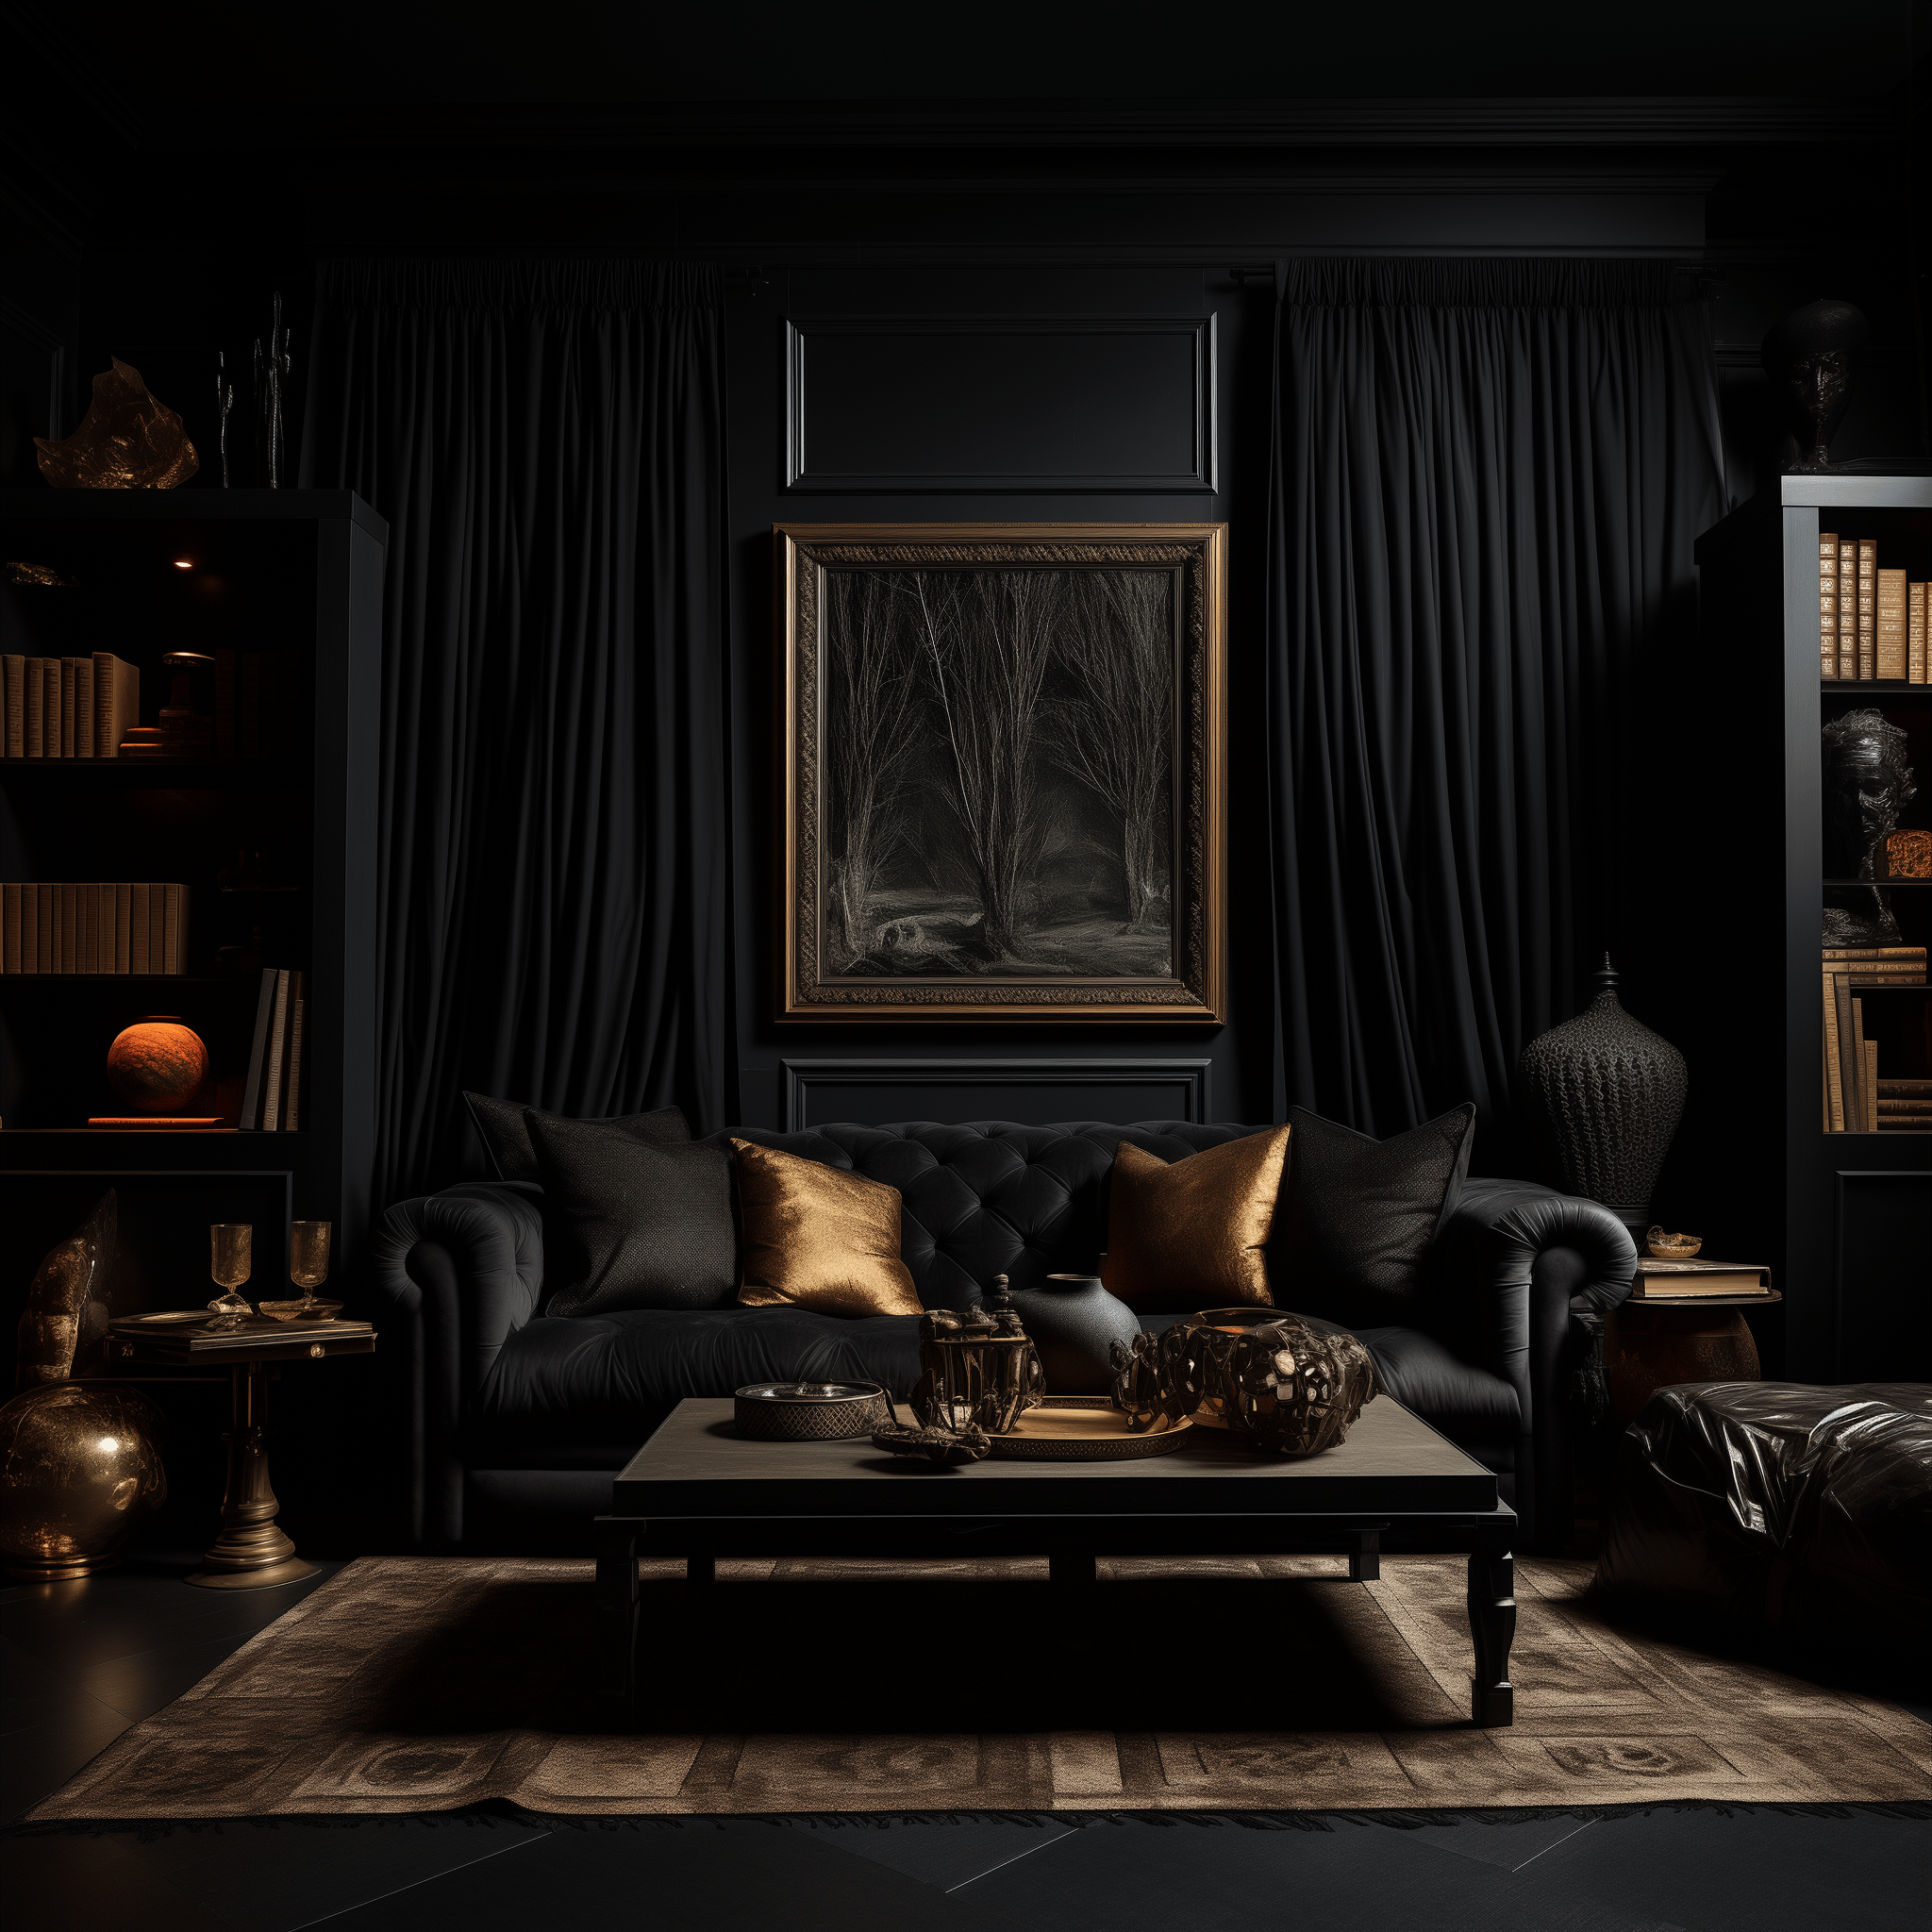 Luxurious dark living room in a real estate photo, showcasing eye-level architectural details and elegant black-colored decor.